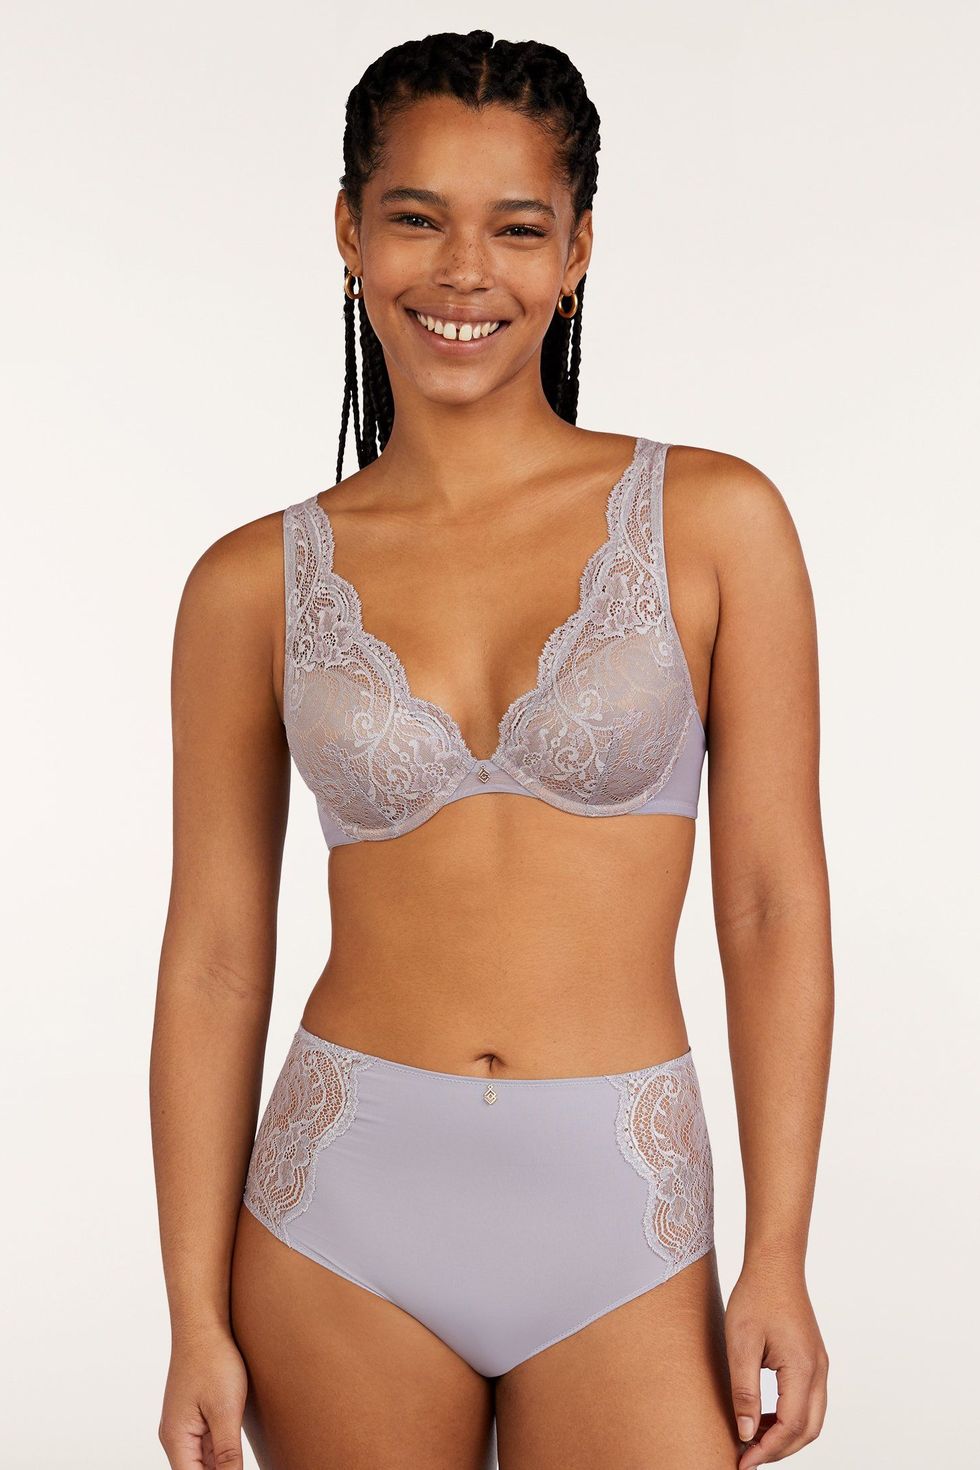 36AA Bras, In Stock Now